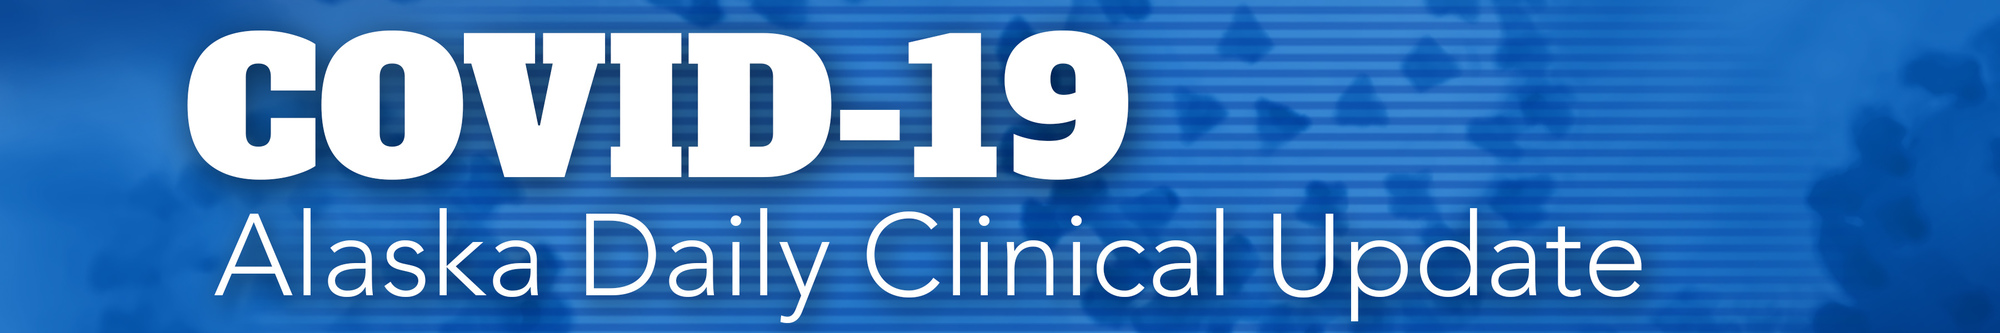 COVID-19 Clinical Newsletter Banner